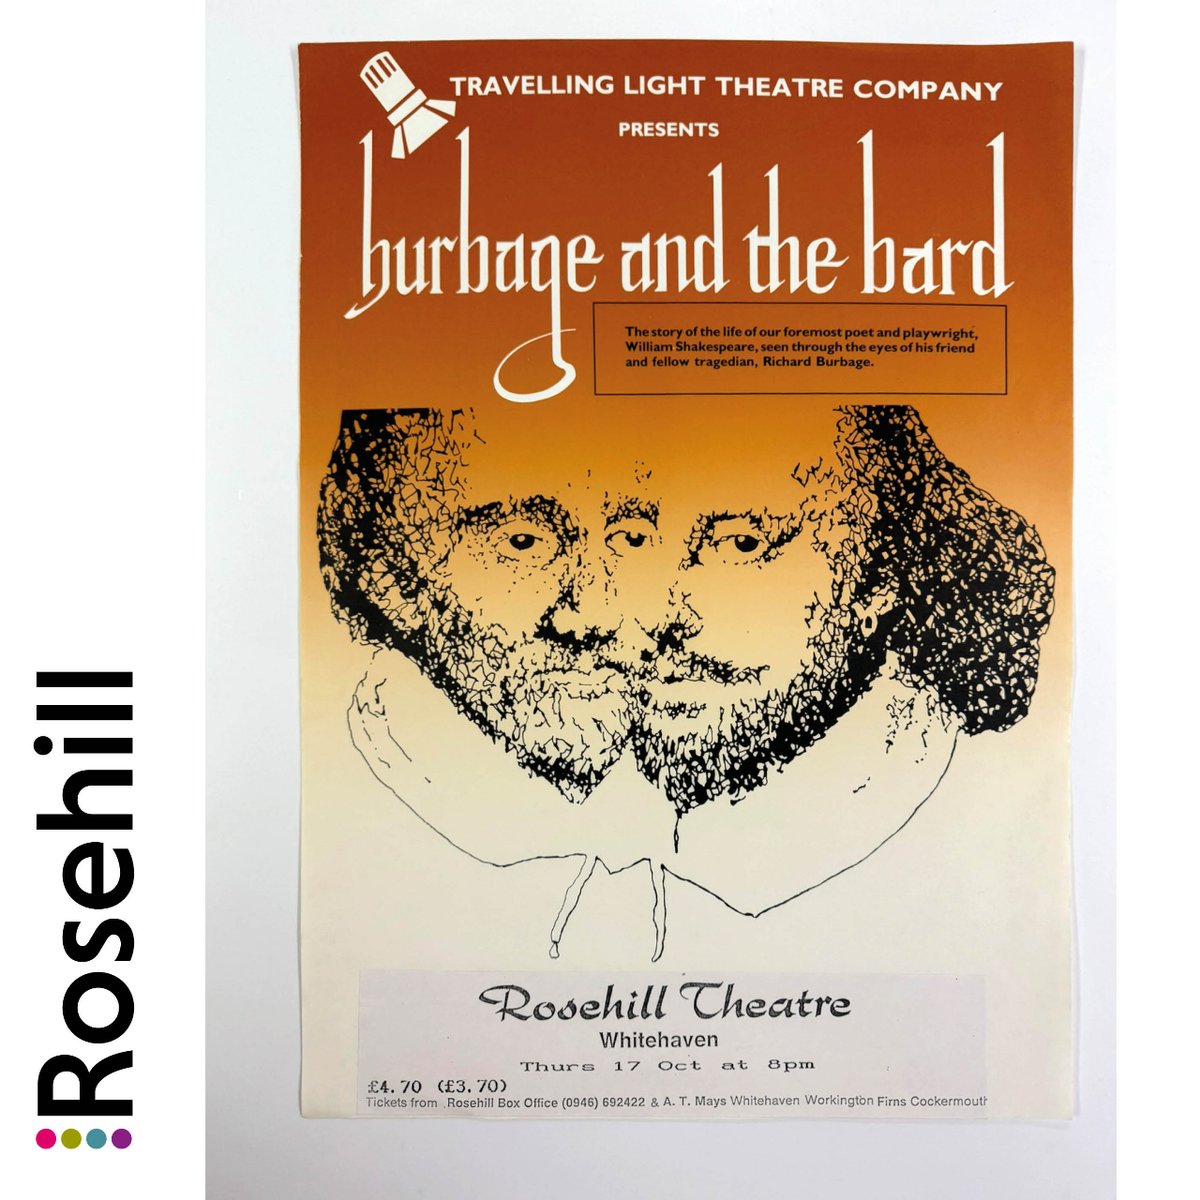 🎭📜 In honor of The Bard's birthday this week, our #ThrowbackThursday goes to 'Burbage and the Bard'! 🎉 It told the story of Shakespeare through the eyes of Burbage. Fun fact: This poster is not only in our archives but also in the V&A! 🏛️ Did you catch this show on our stage?